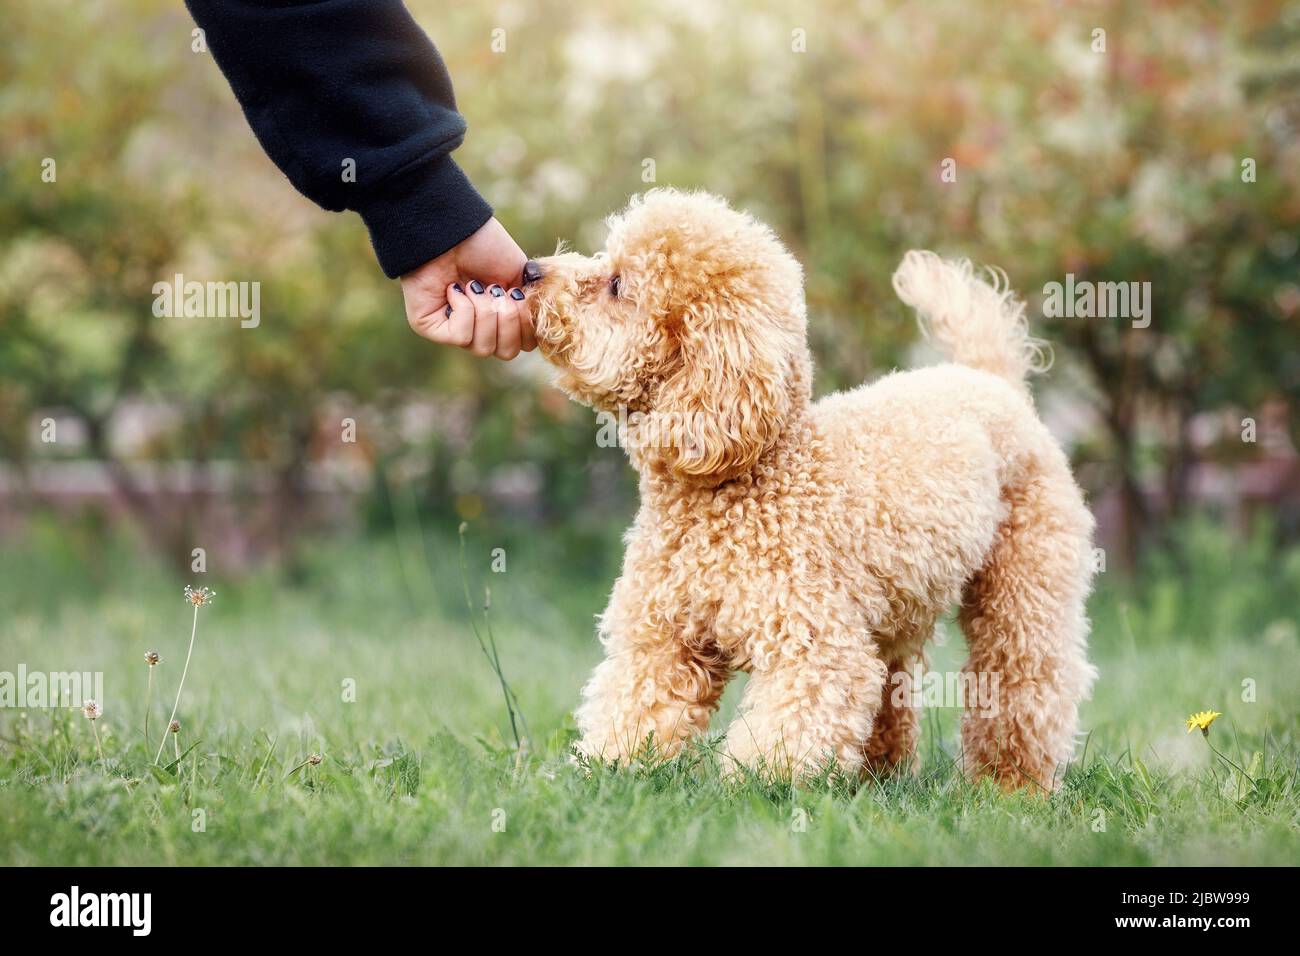 The young girl is hand feeding her little poodle. The child engages the dog's training and gives him a reward. Cute dog and good friend. Stock Photo